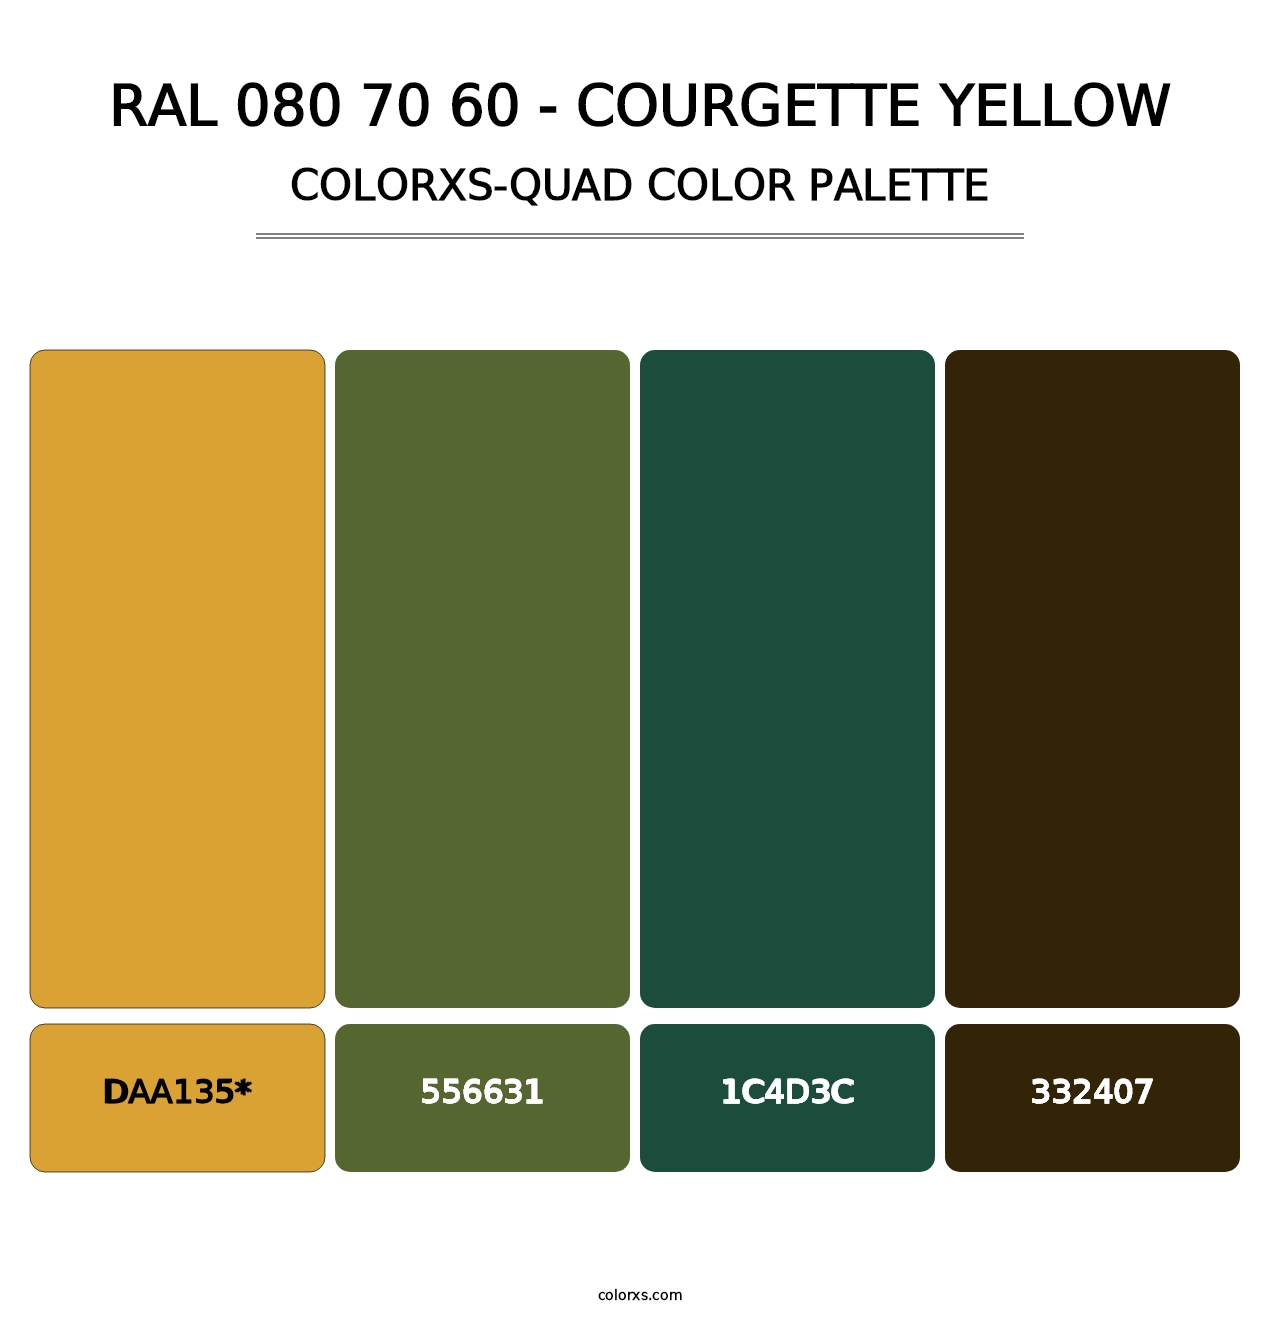 RAL 080 70 60 - Courgette Yellow - Colorxs Quad Palette